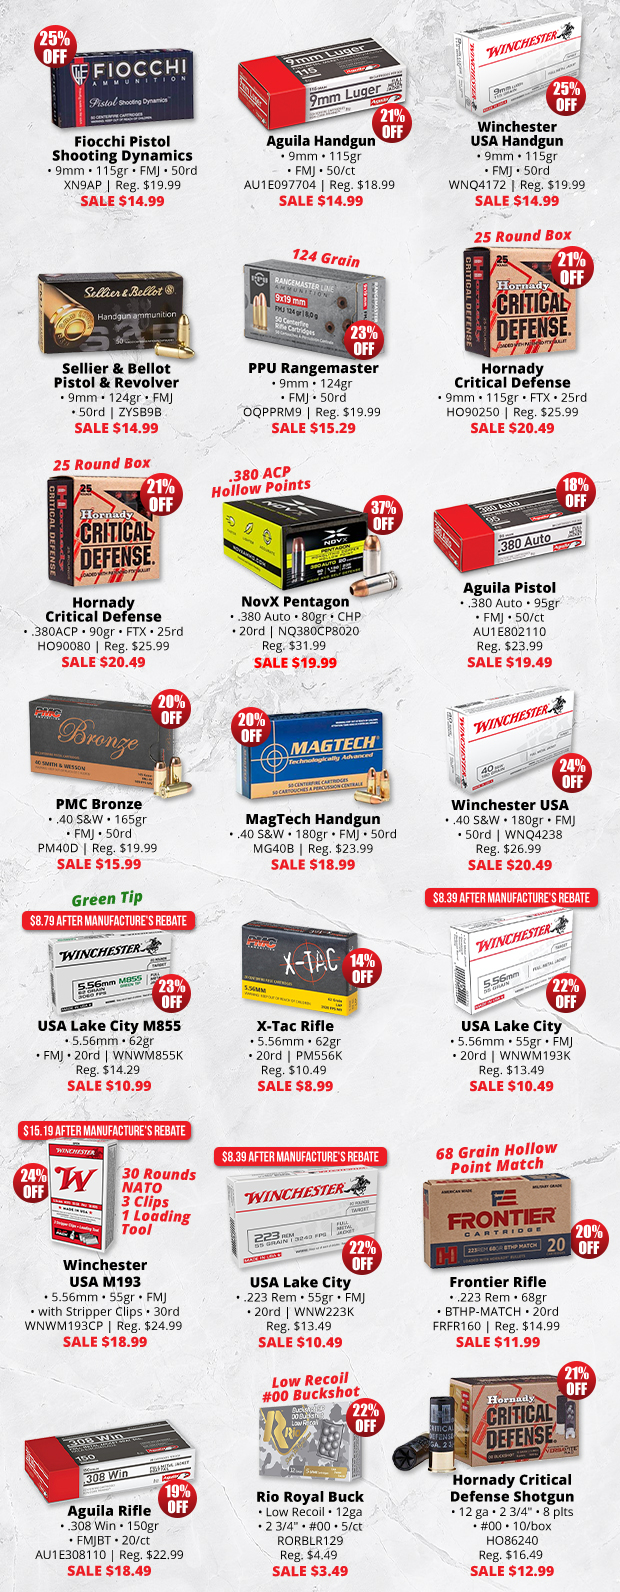 Ammo Mix Monday With up to 37% Off